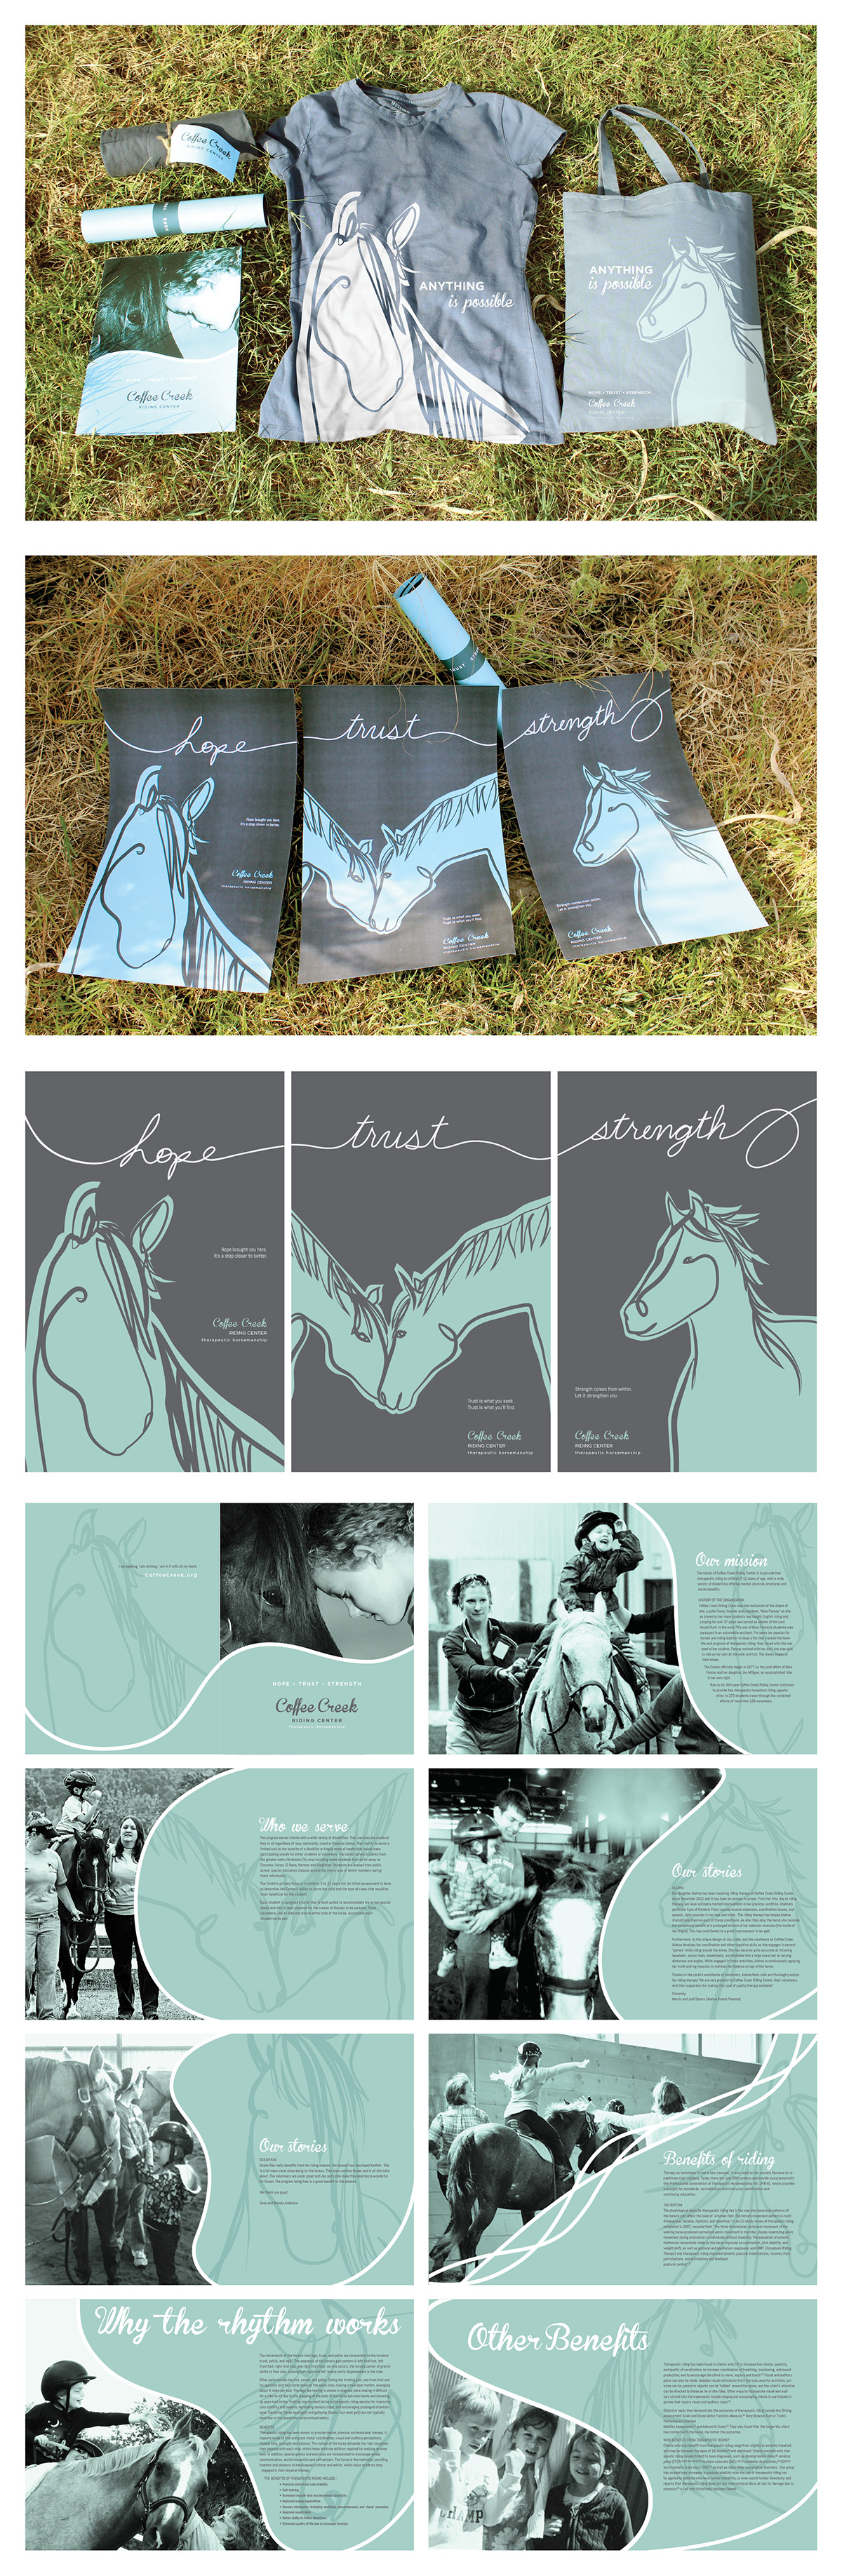 horses nonprofit organization coffee creek therapeutic horseriding children Layout editorial Screenprinting totebag shirt Booklet posters vector